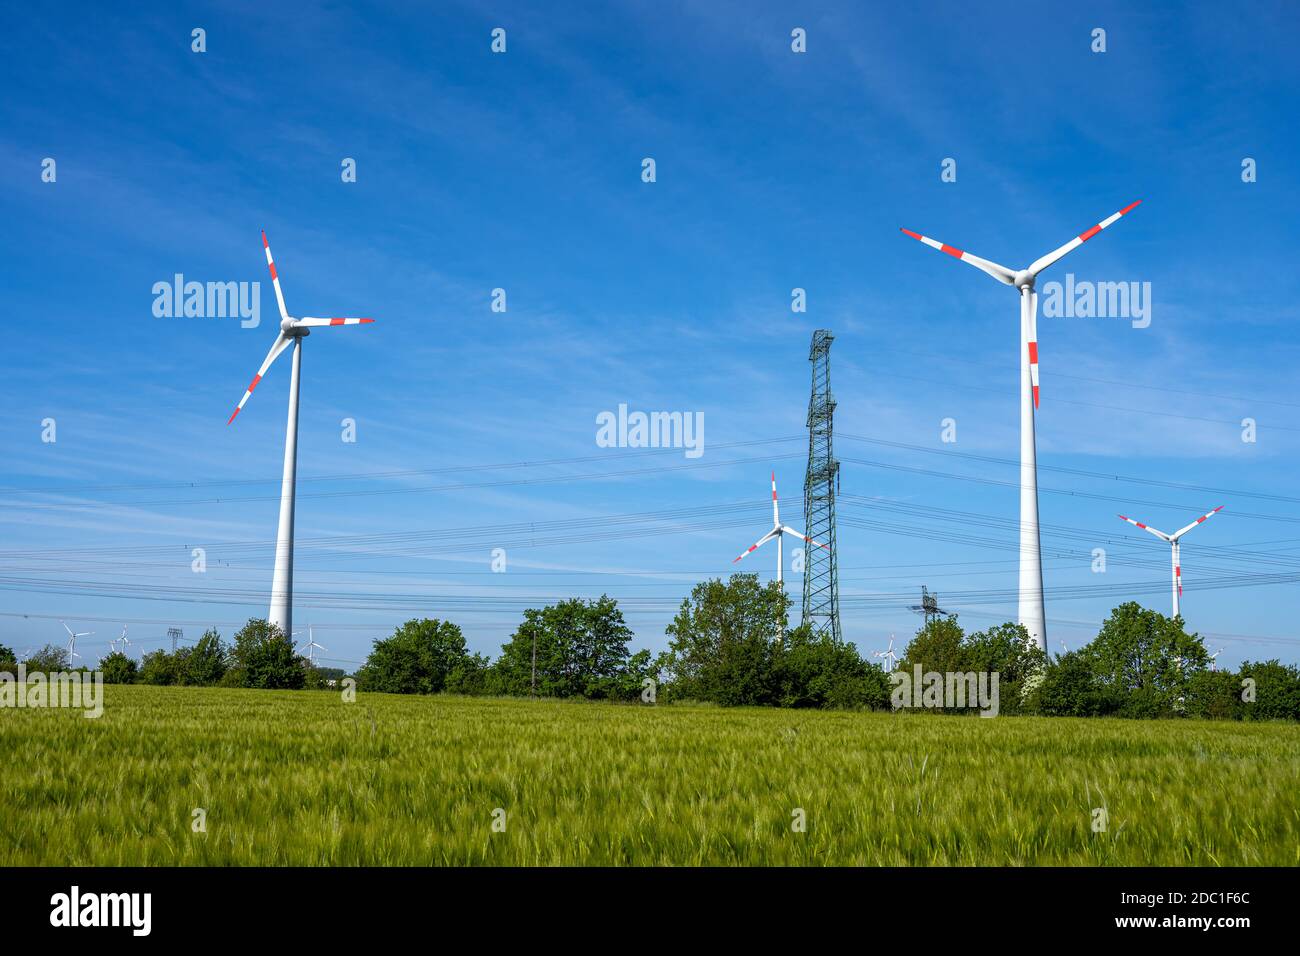 Wind power turbines and power lines seen in Germany Stock Photo